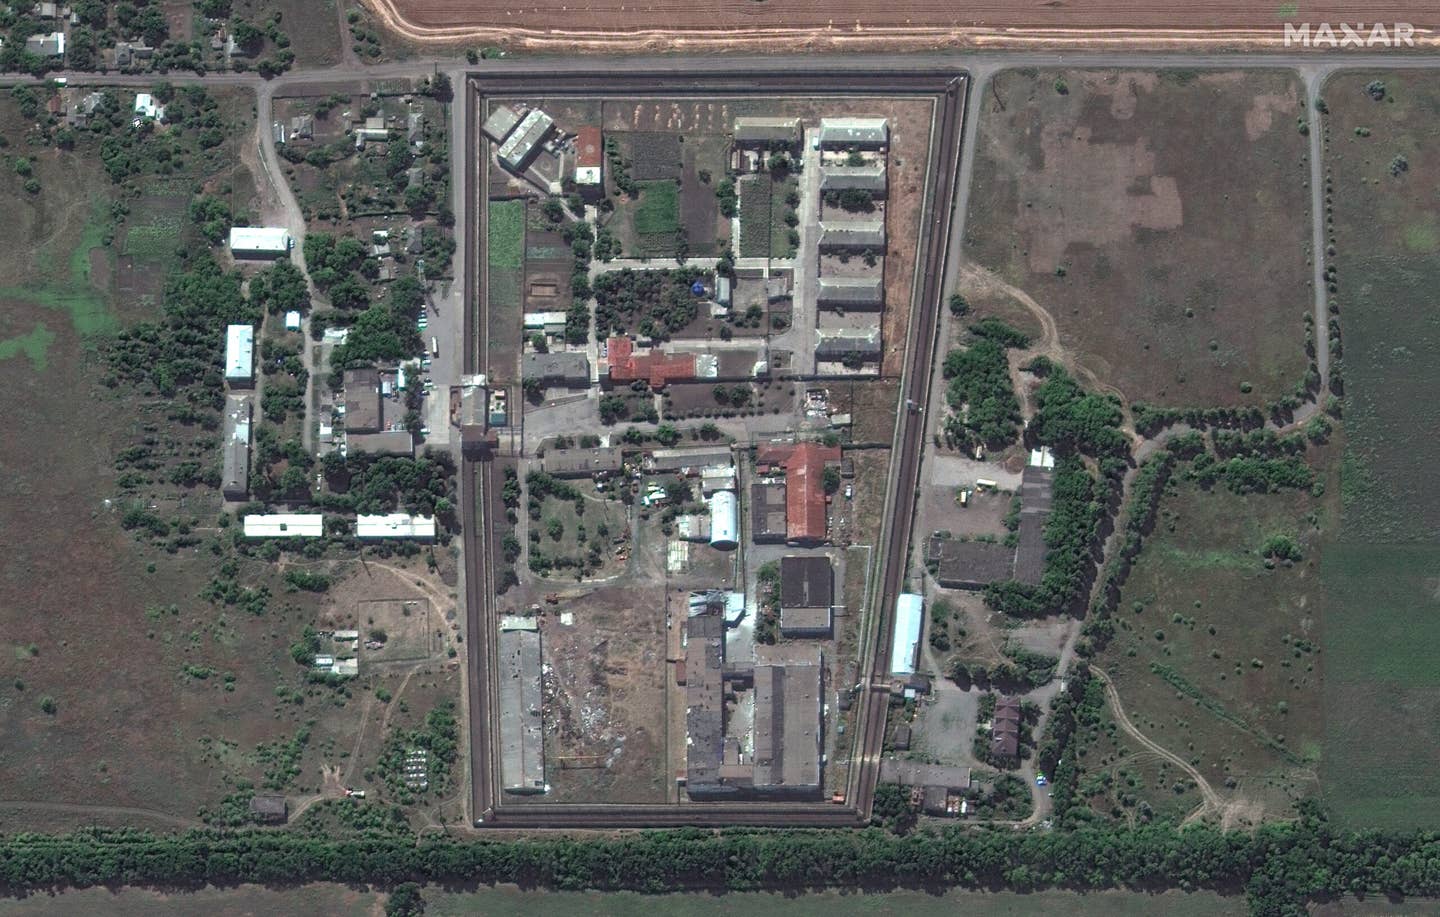 In a subsequent image after an explosion killed more than 50 POWs in the Olenivka prison, the graves from the July 27 image have been largely covered. (Maxar Technologies / July 29, 2022).